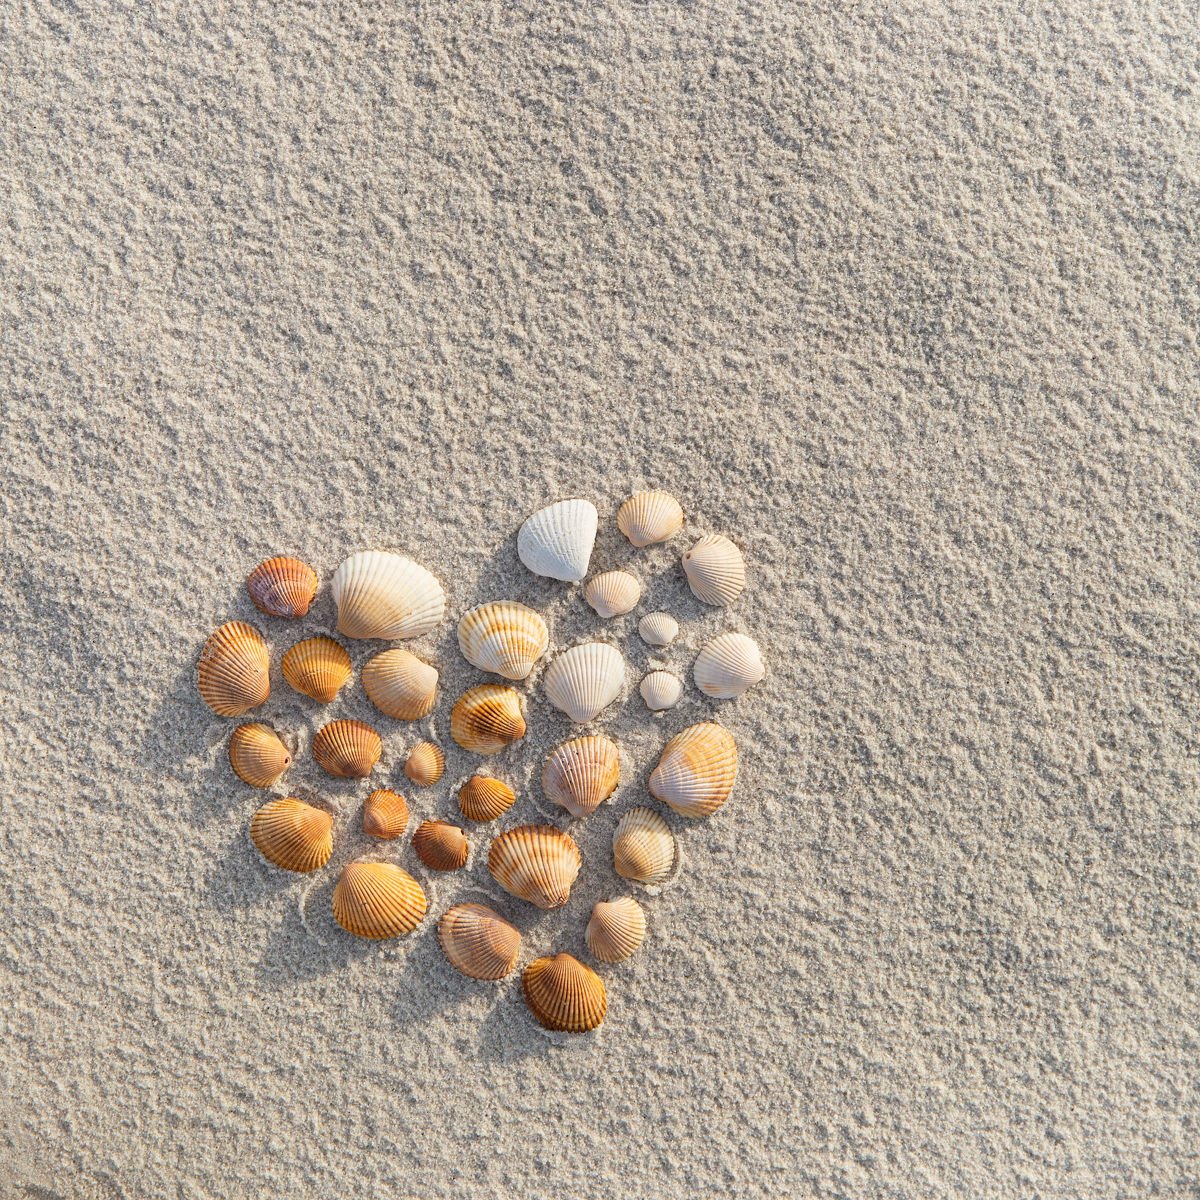 Seashells placed in heart shape on sand finding your passion